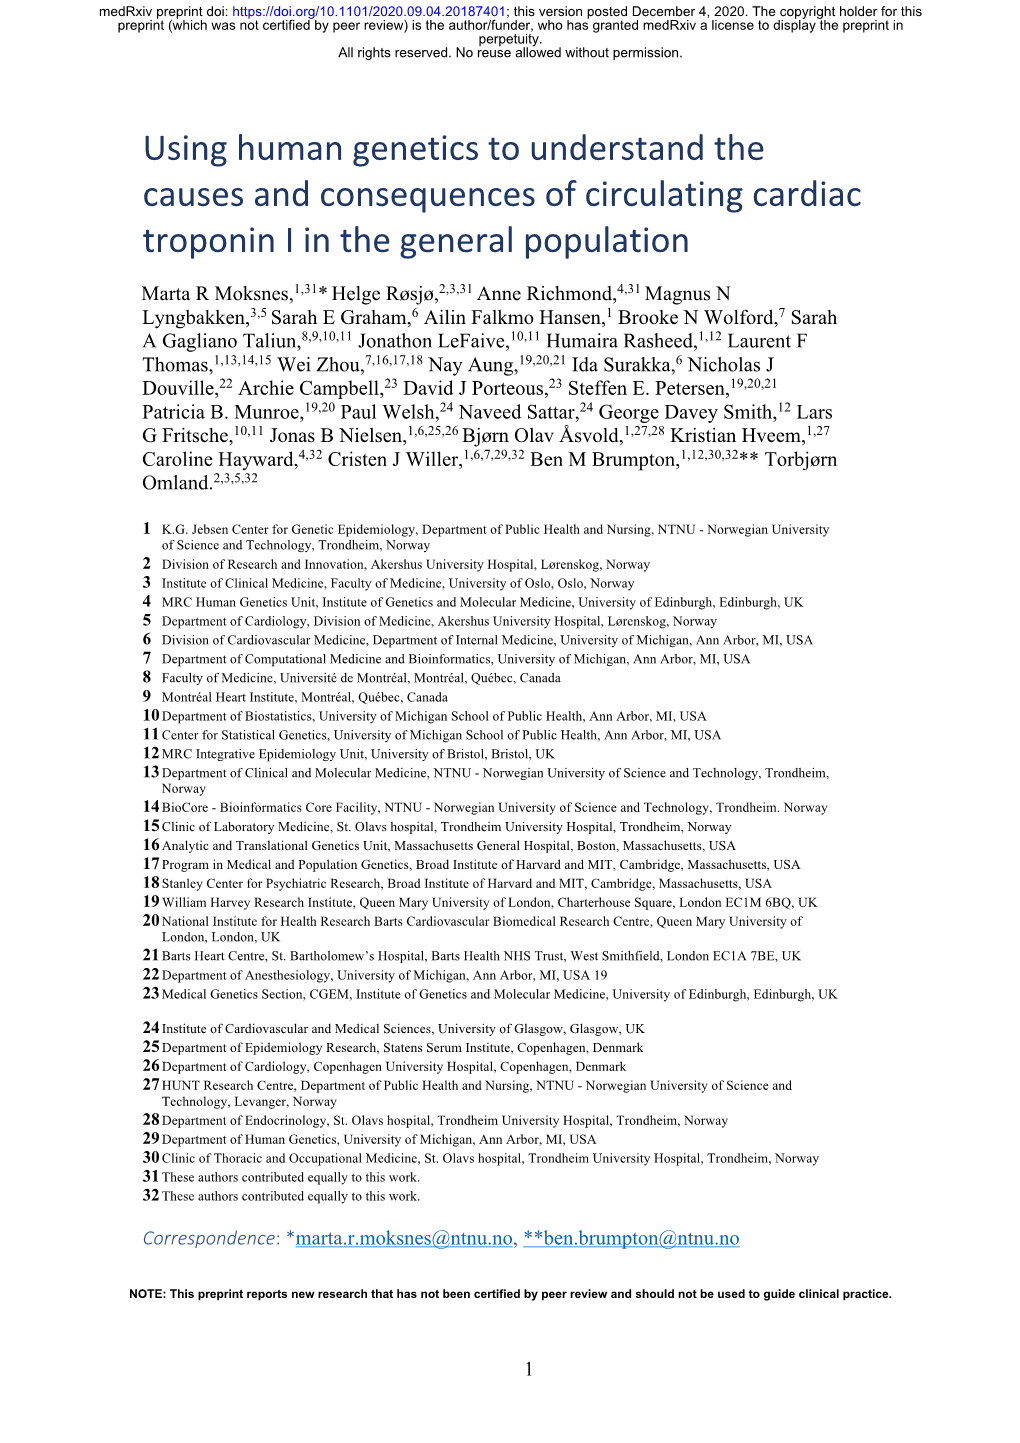 Using Human Genetics to Understand the Causes and Consequences of Circulating Cardiac Troponin I in the General Population